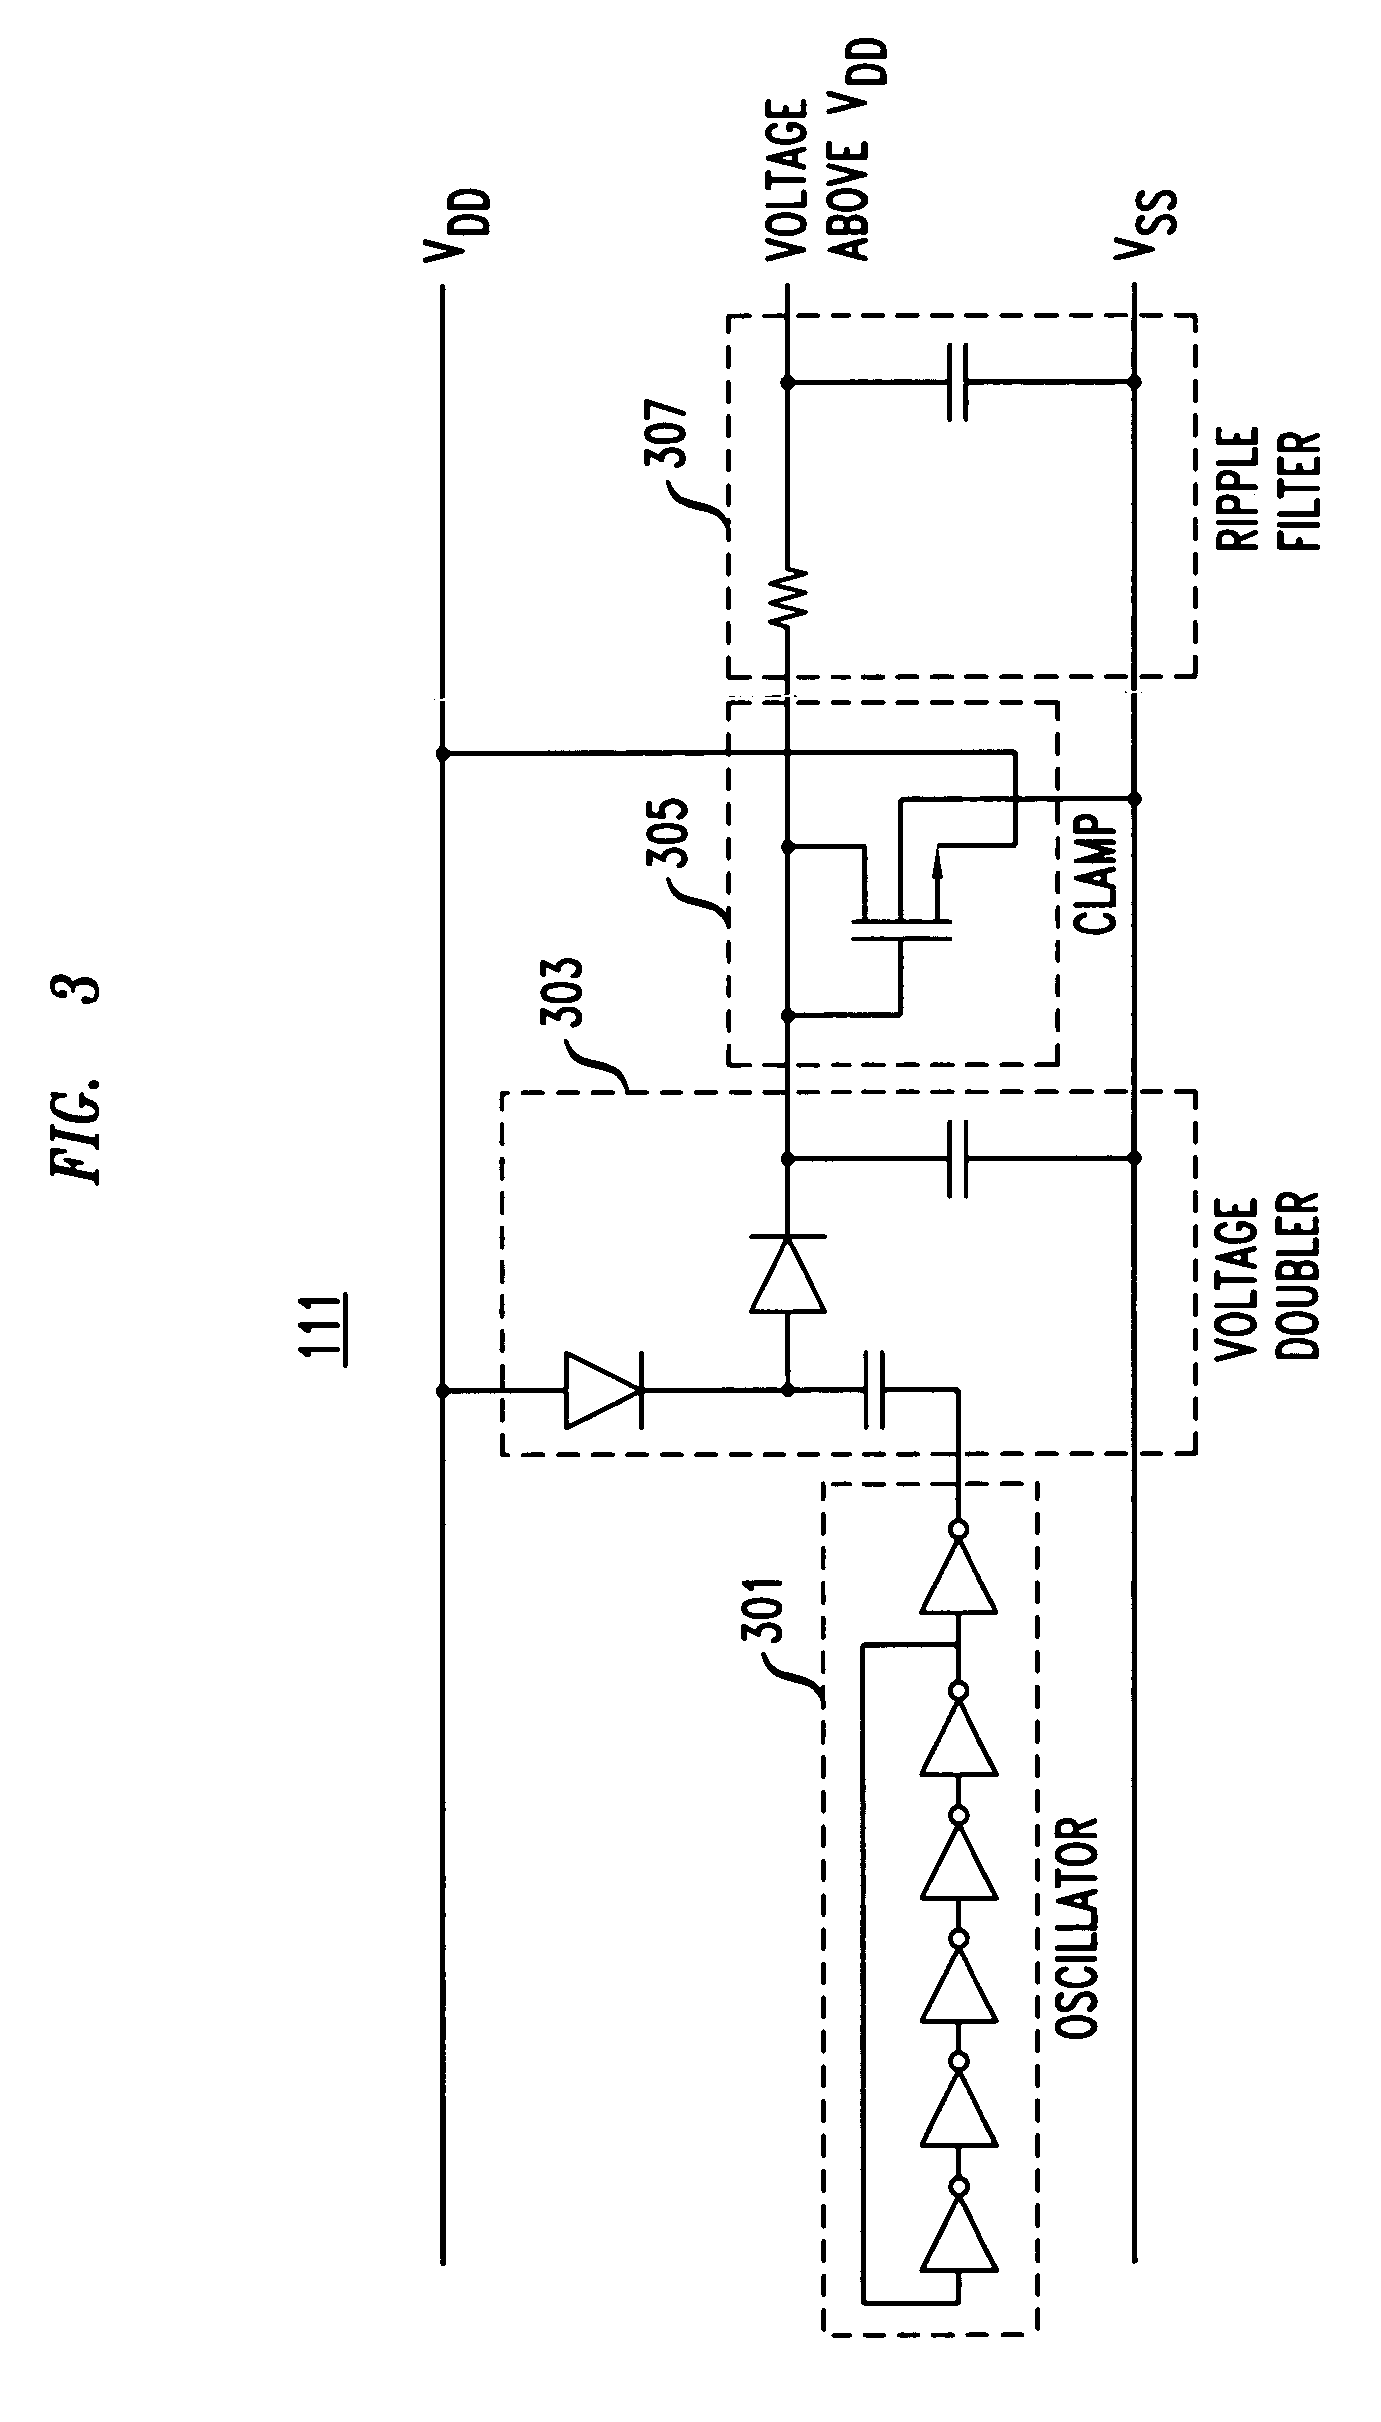 Active inductor